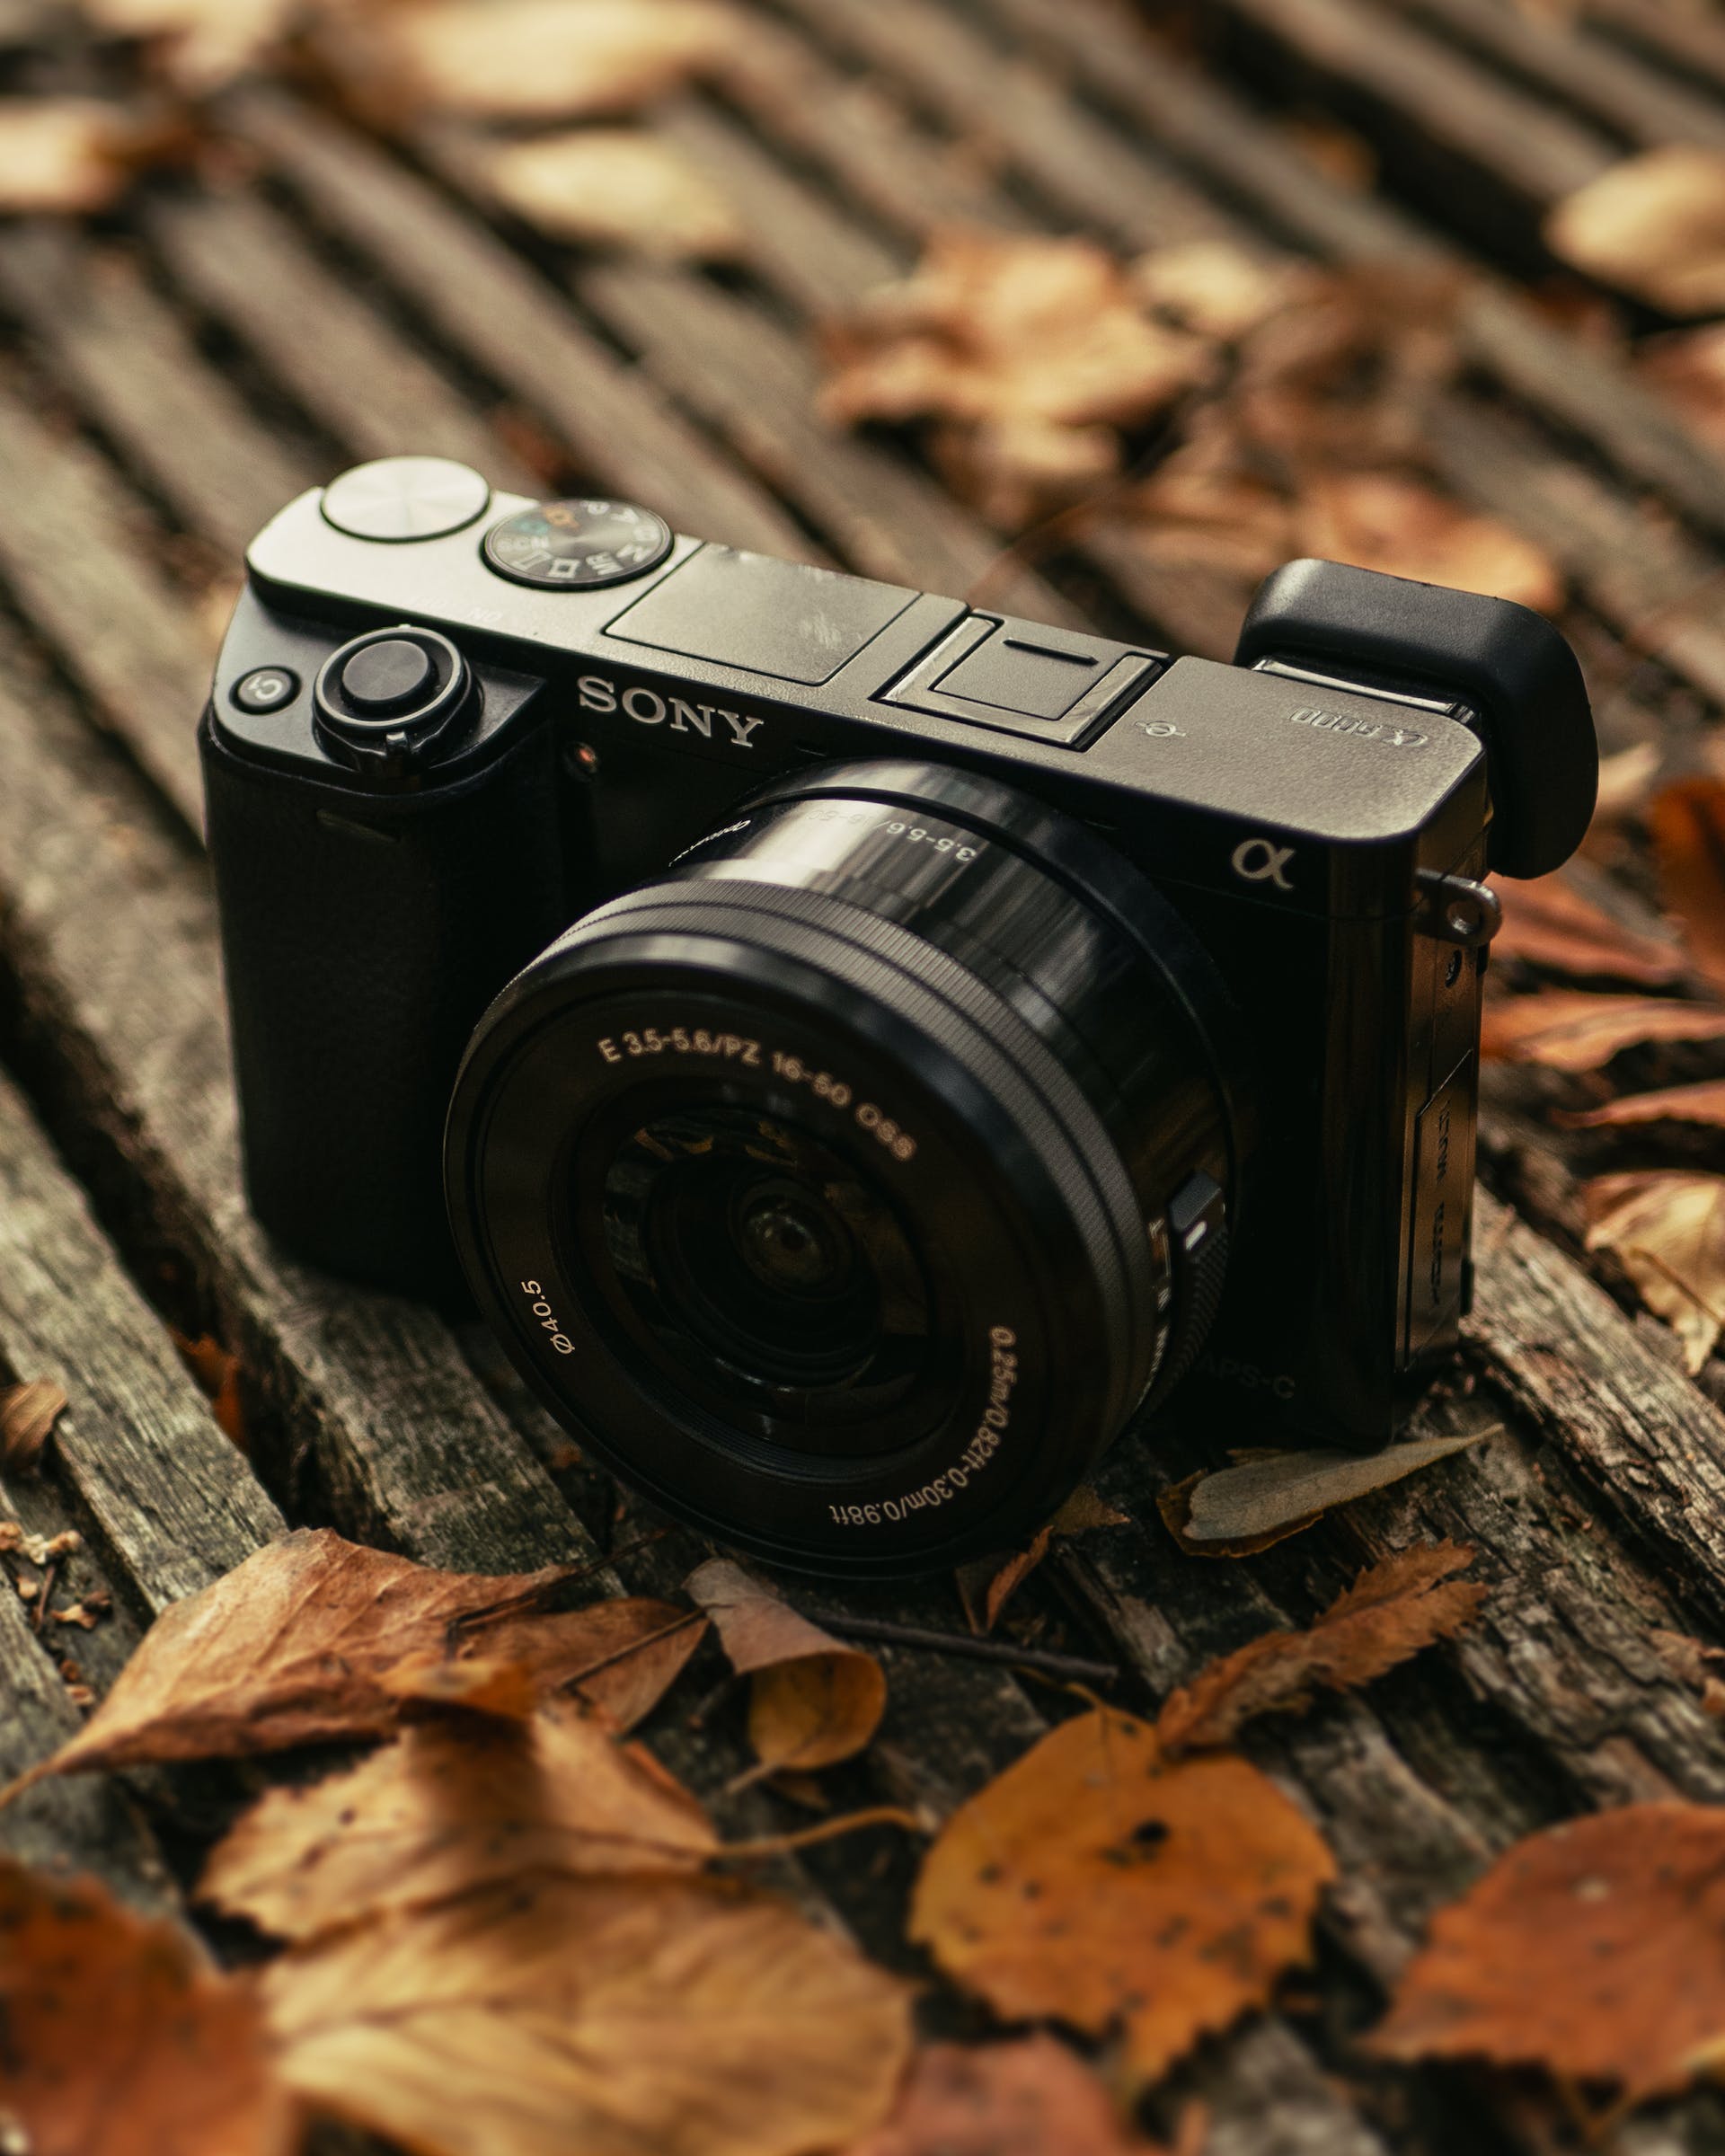 A digital camera lying on a wooden surface | Source: Pexels